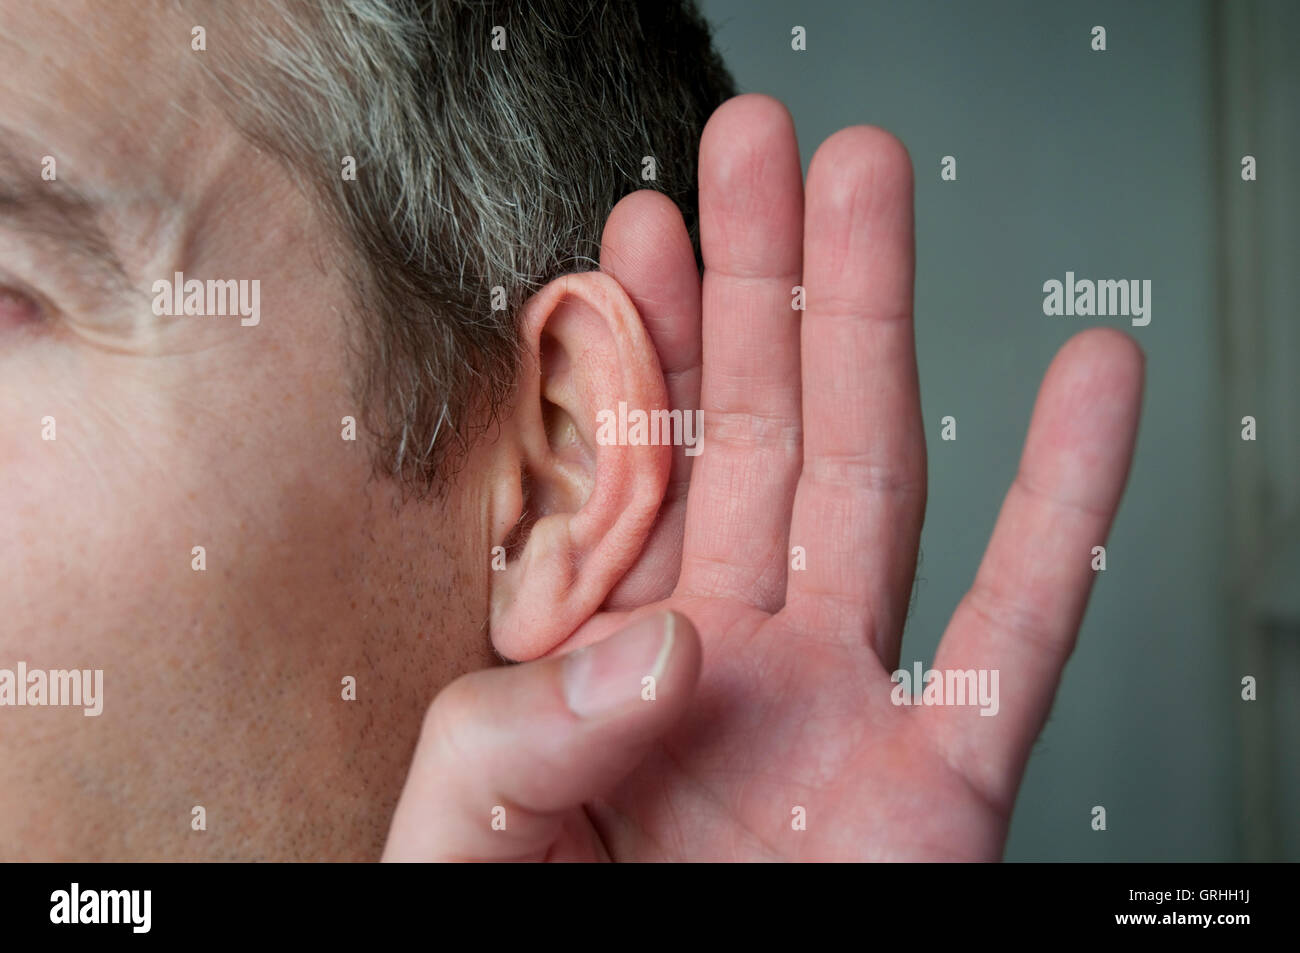 Man's ear with his hand around it to overhear. Close view. Stock Photo